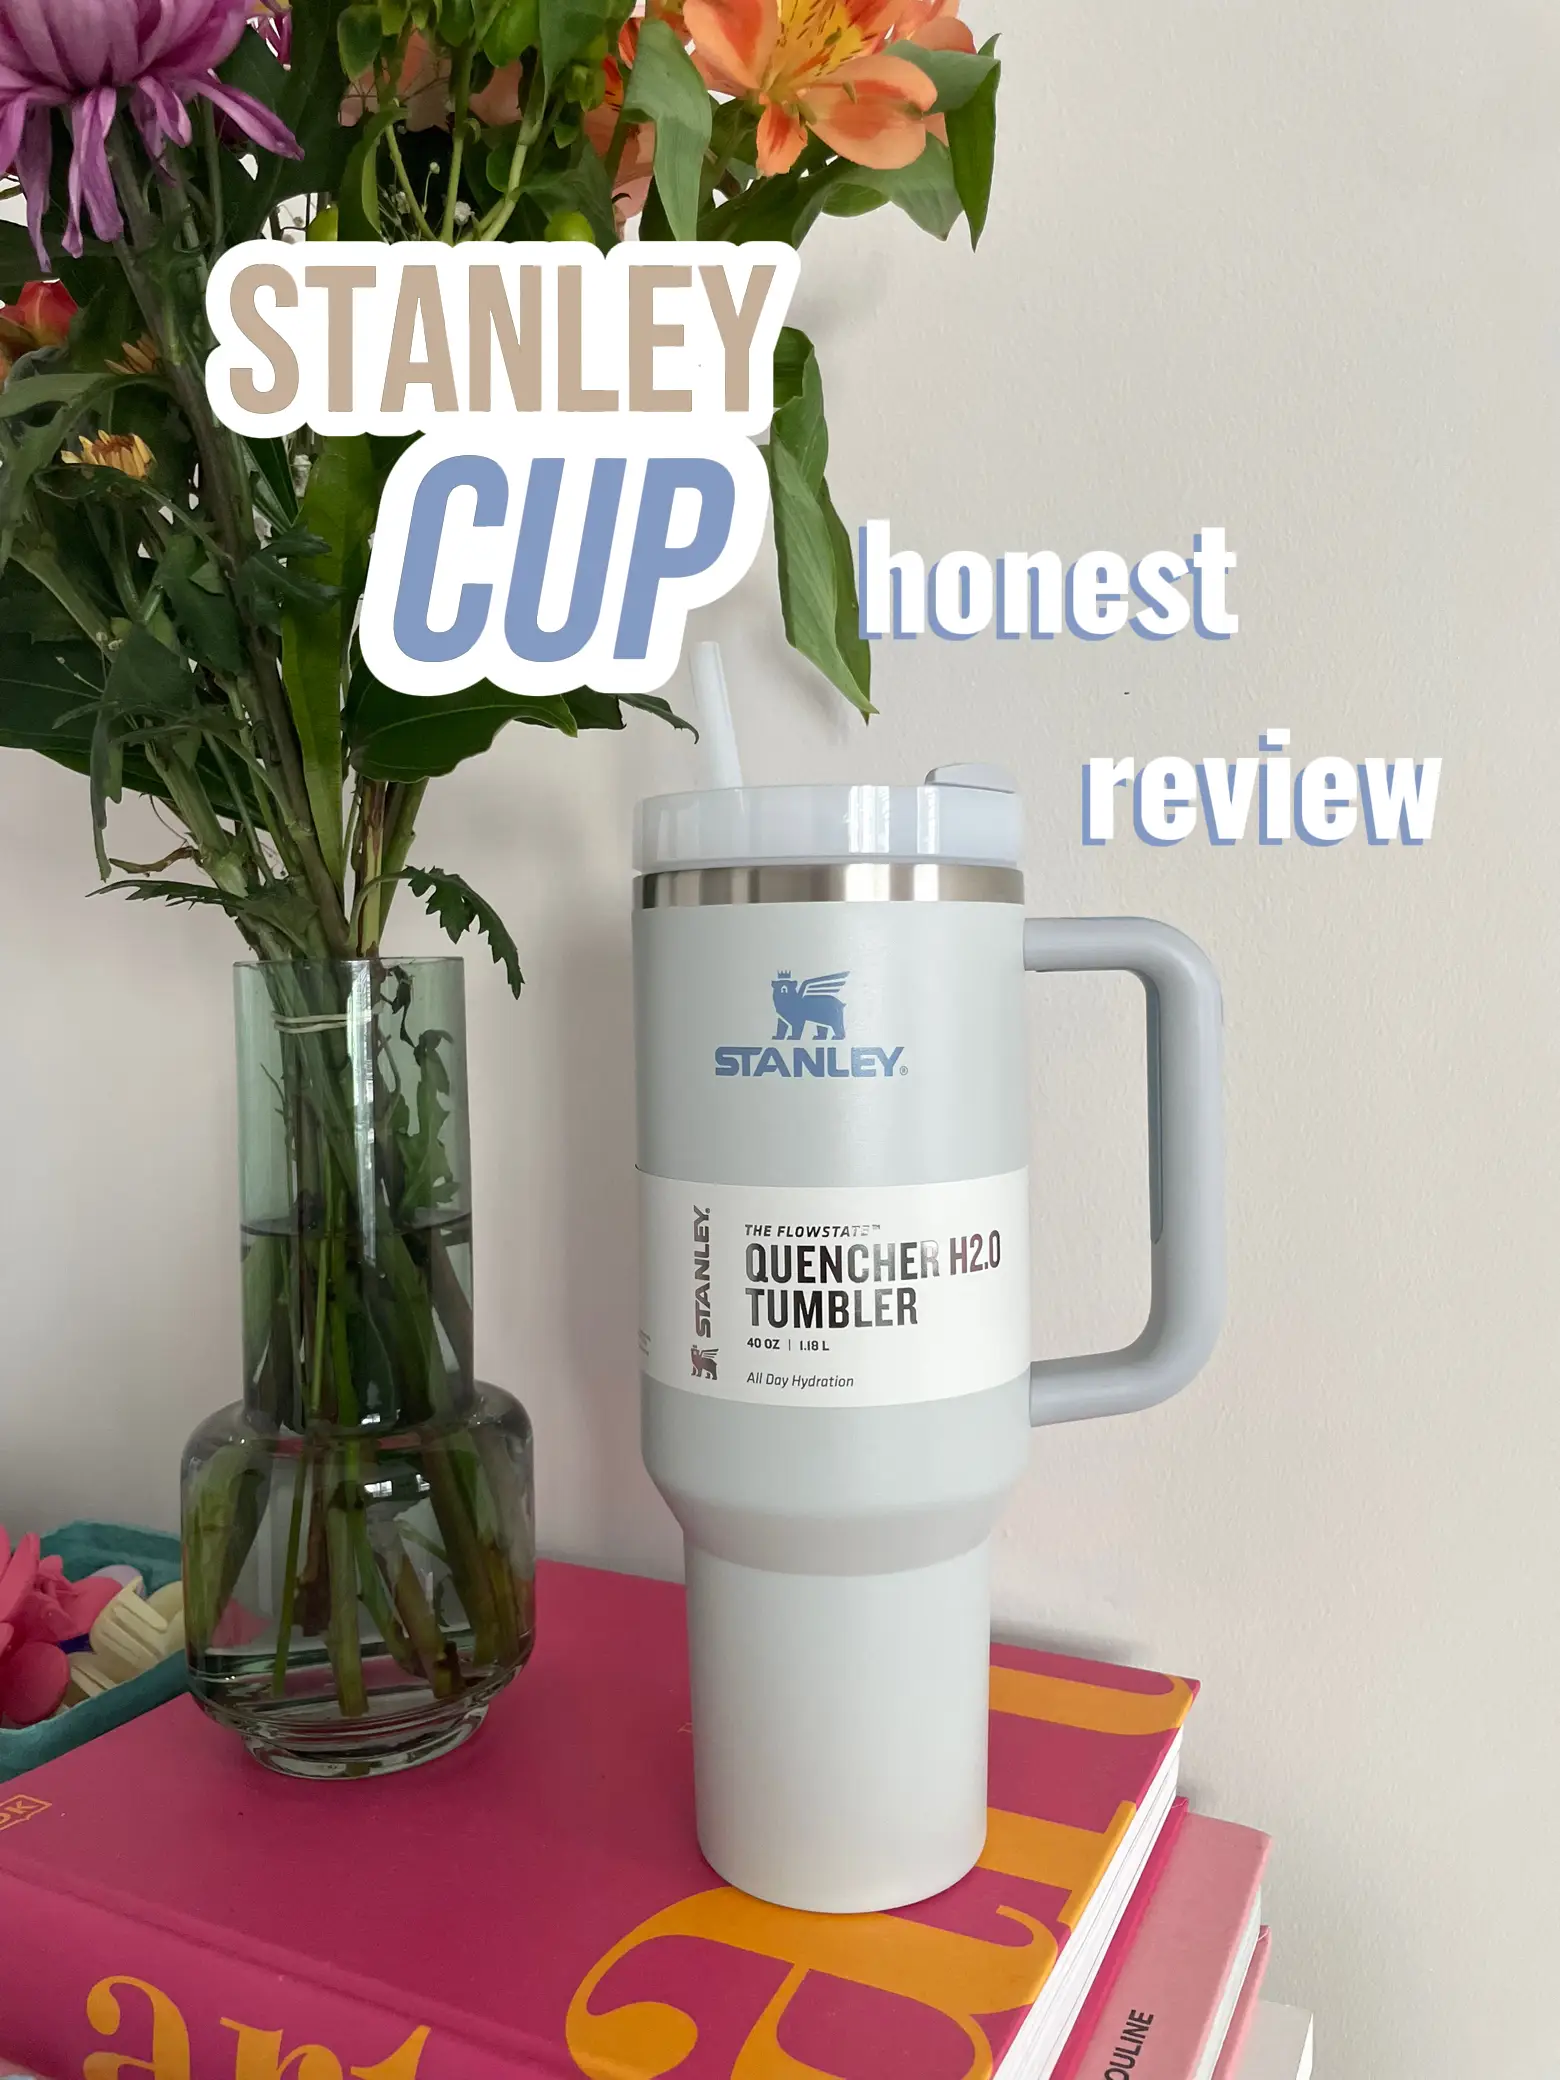 New Leakproof Cup 💕💦 Now I want more!! #stanleydupealert #stanleydup, Stanley Cups